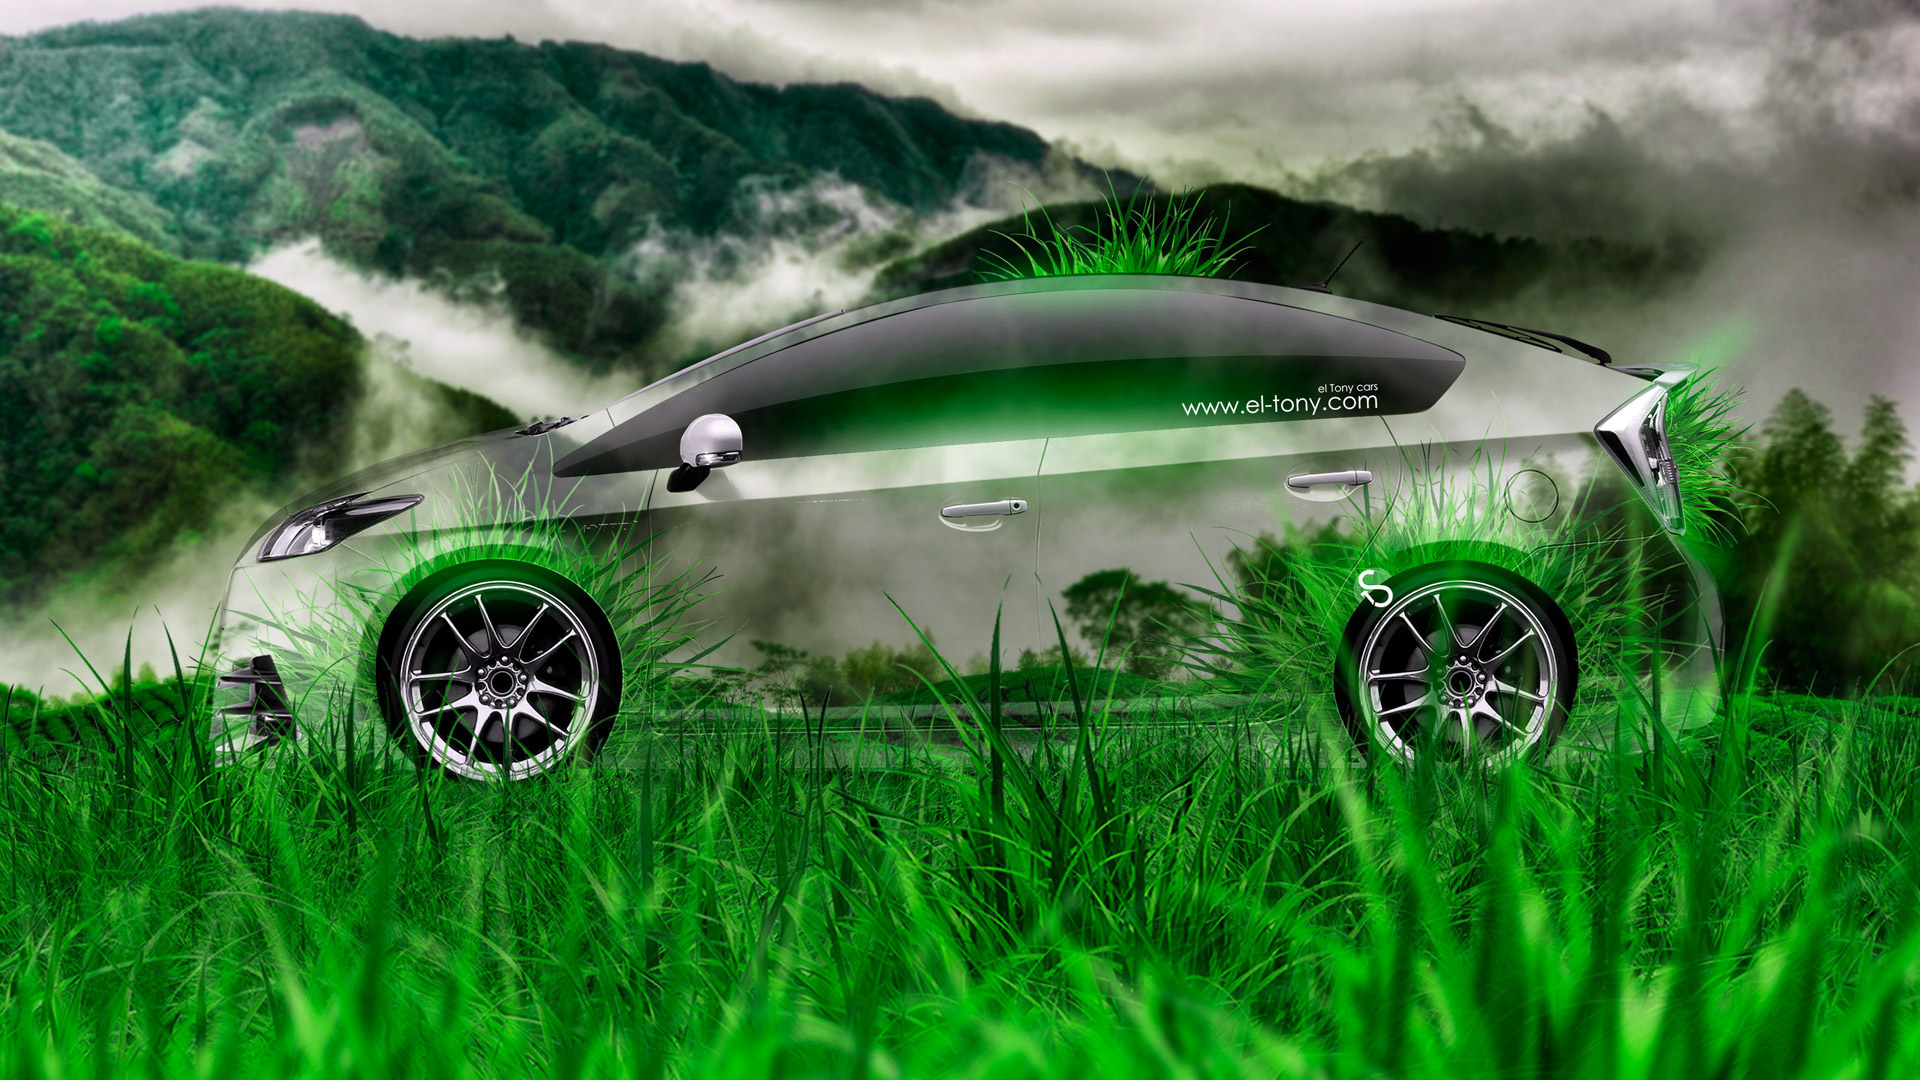 tony kokhan, toyota, prius, side, crystal, nature, car, green, grass, hybrid, el tony cars, photoshop, hd wallpapers, art, design, style,  , , , , 2014, , , , , , , ,  , 